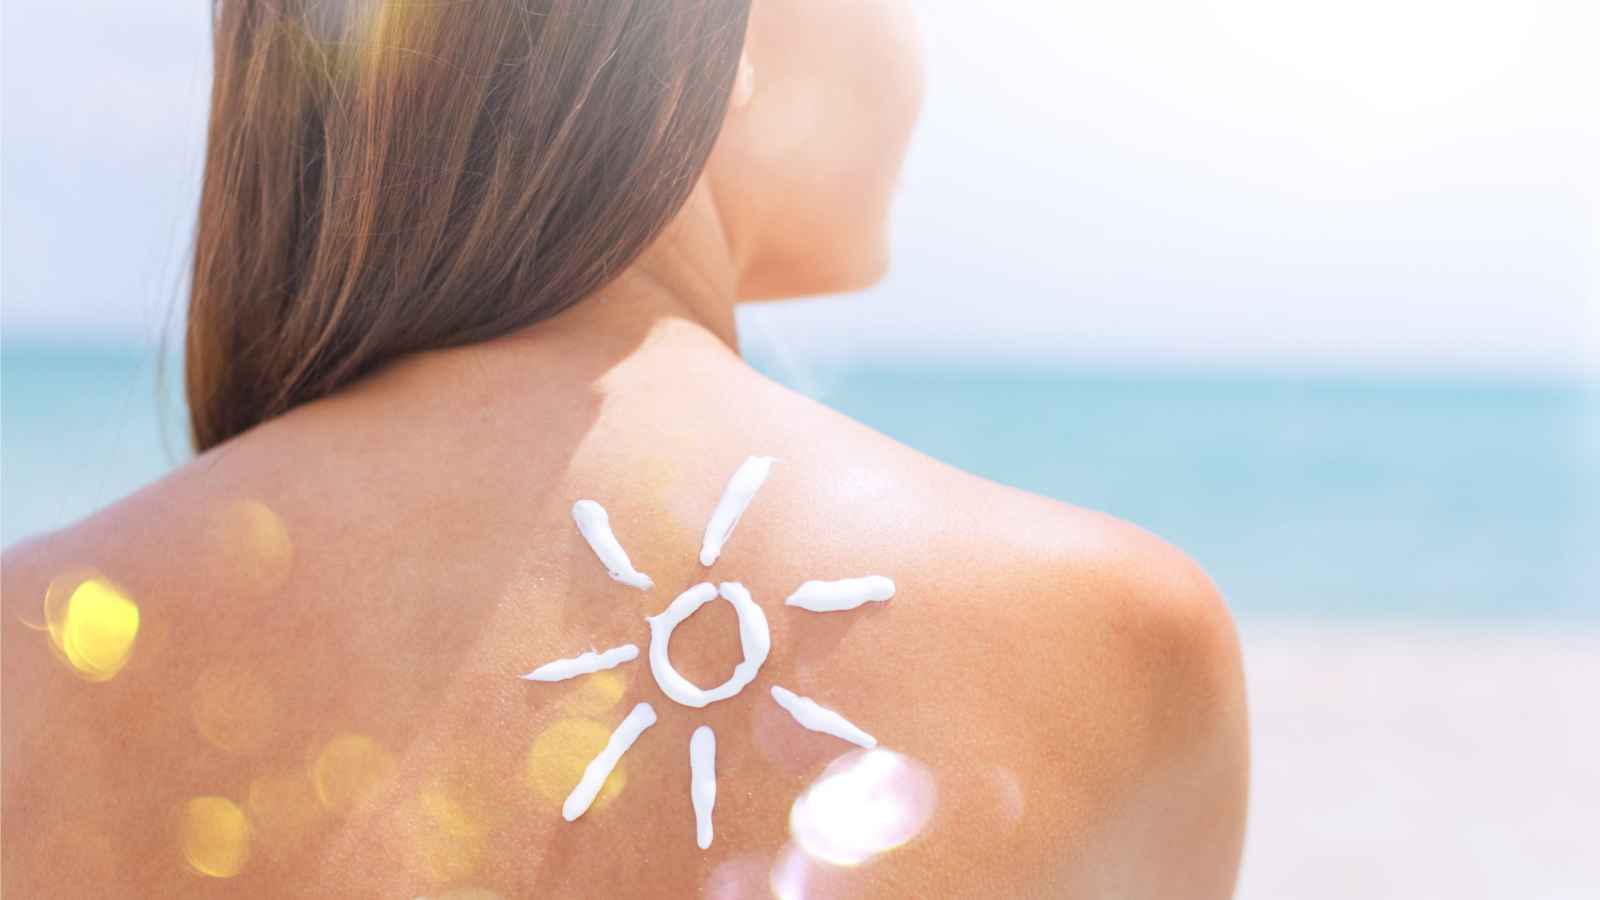 National Sunscreen Day 2023: Date, History, Facts about The Sun